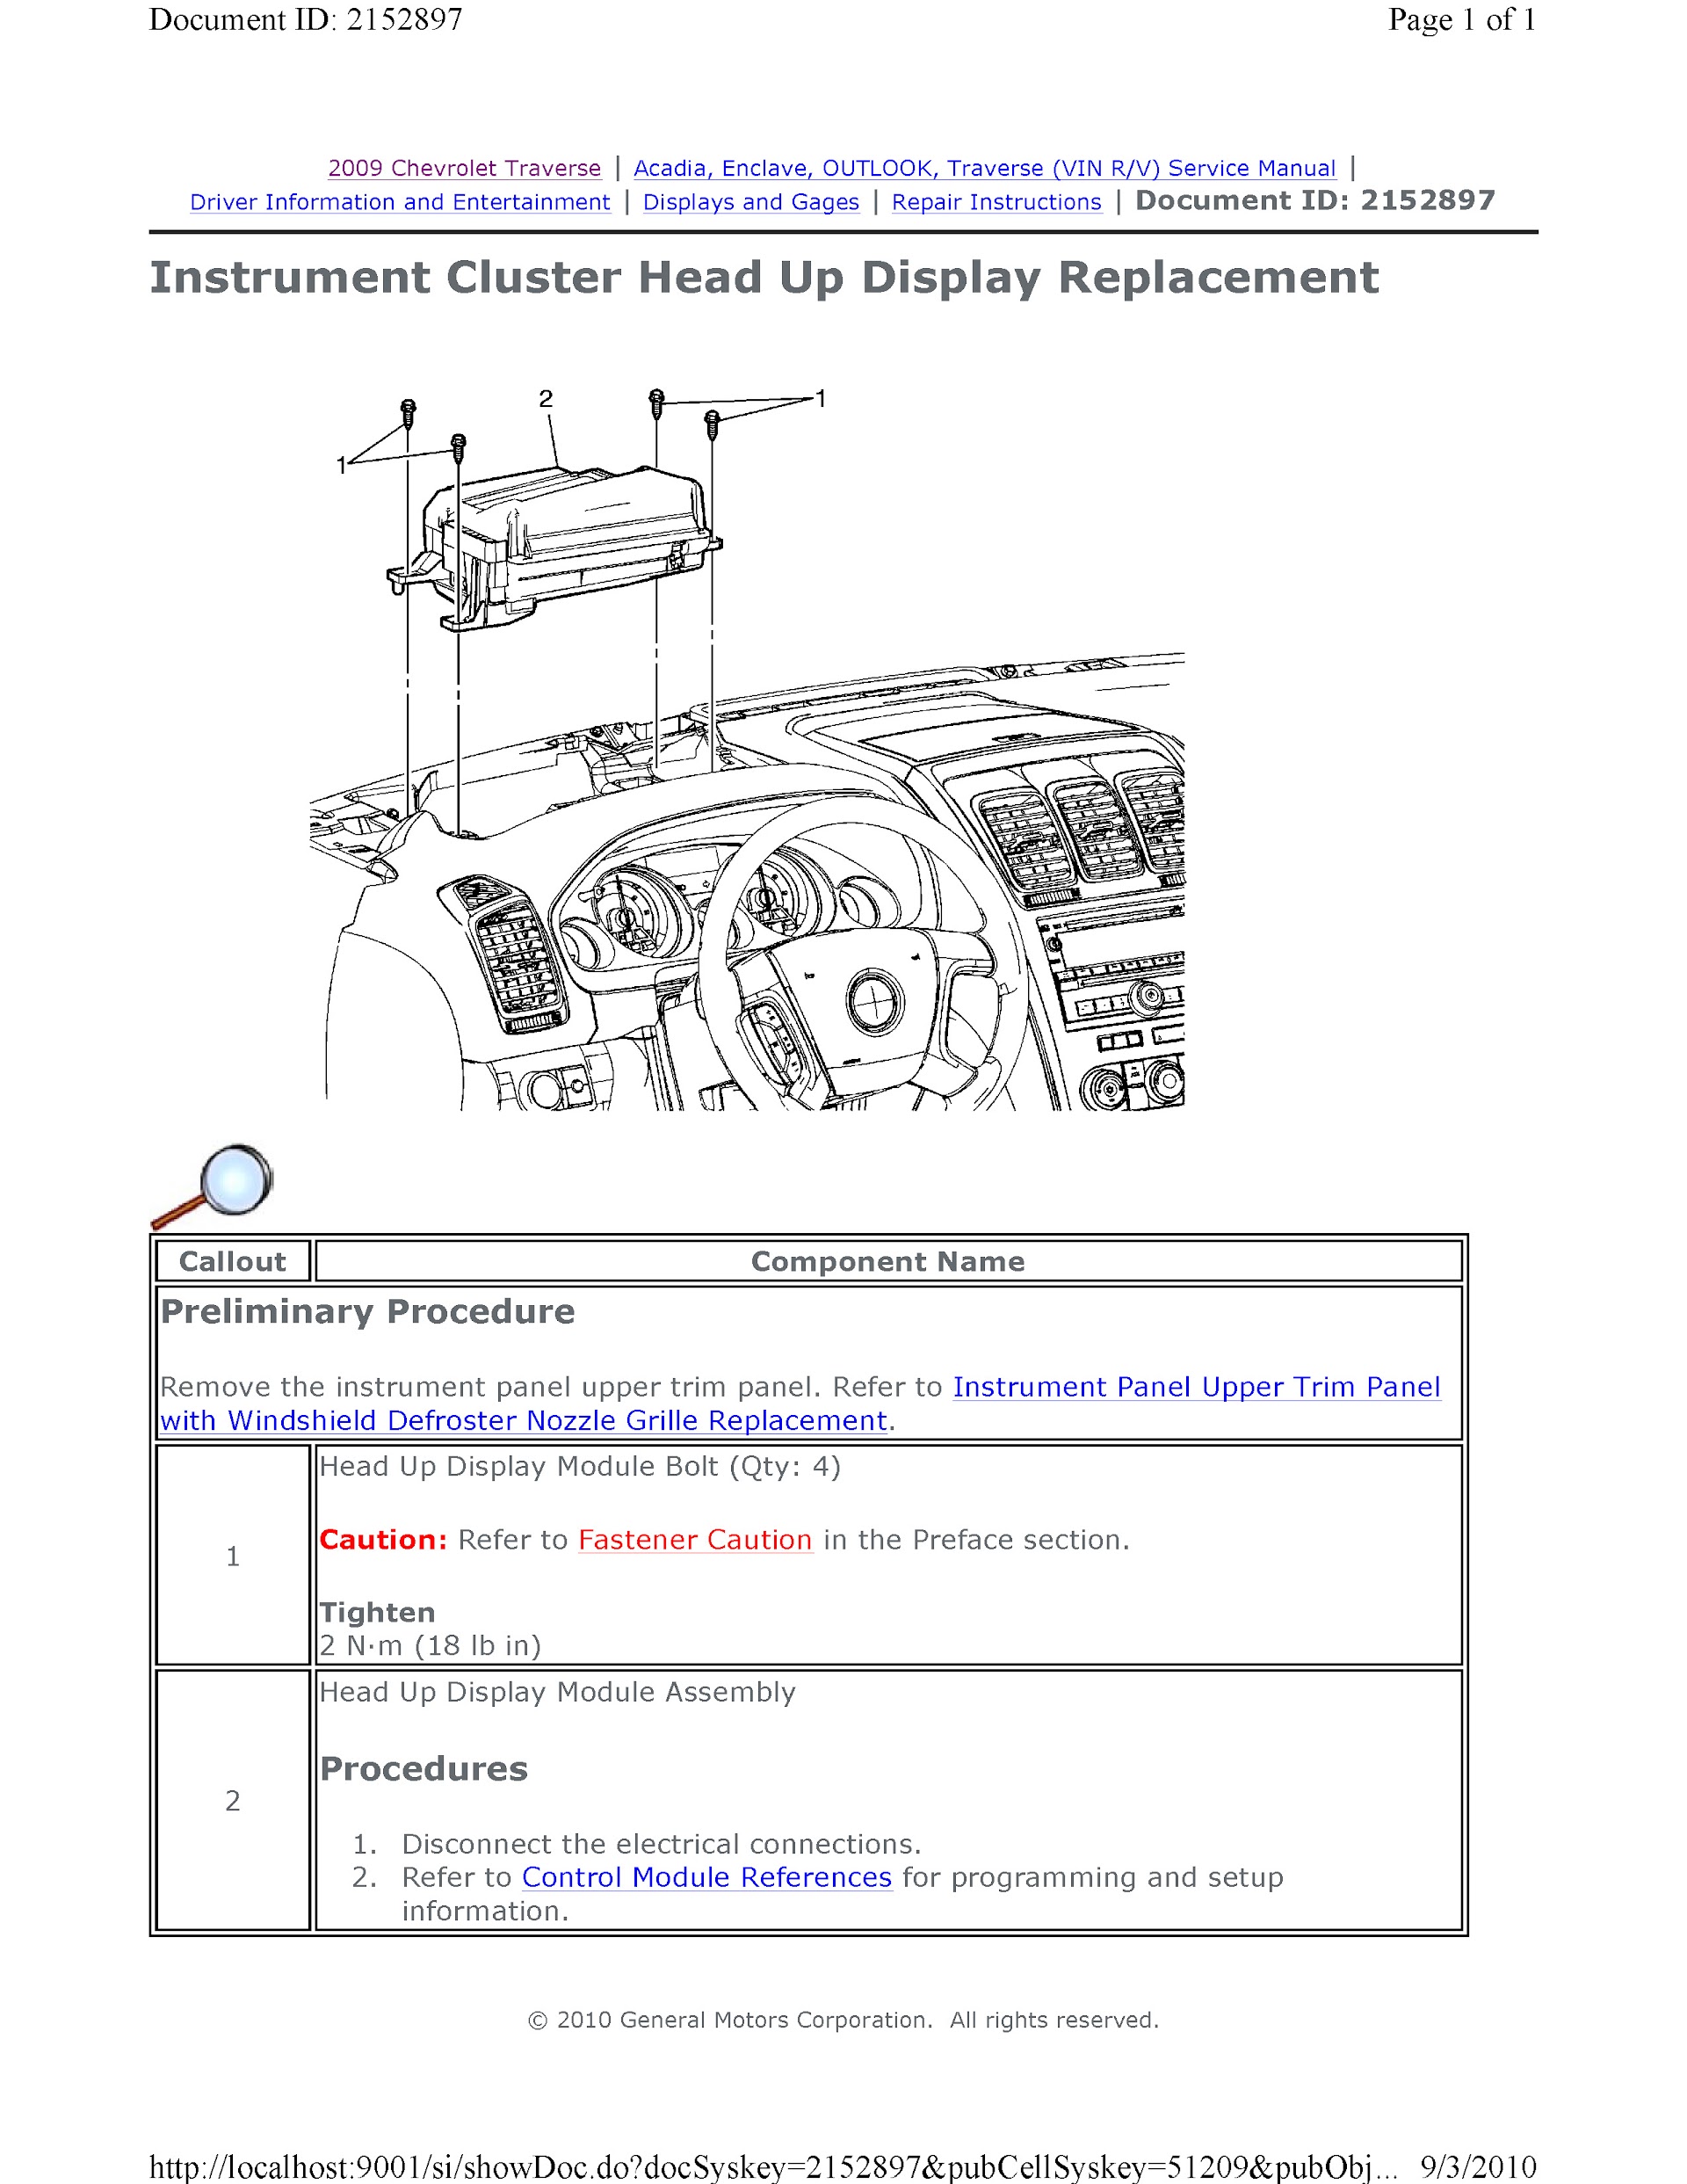 CONTENTS: 2009-2010 Chevrolet Traverse Repair Manual, Instrument Cluster Head Up Display Repalcement